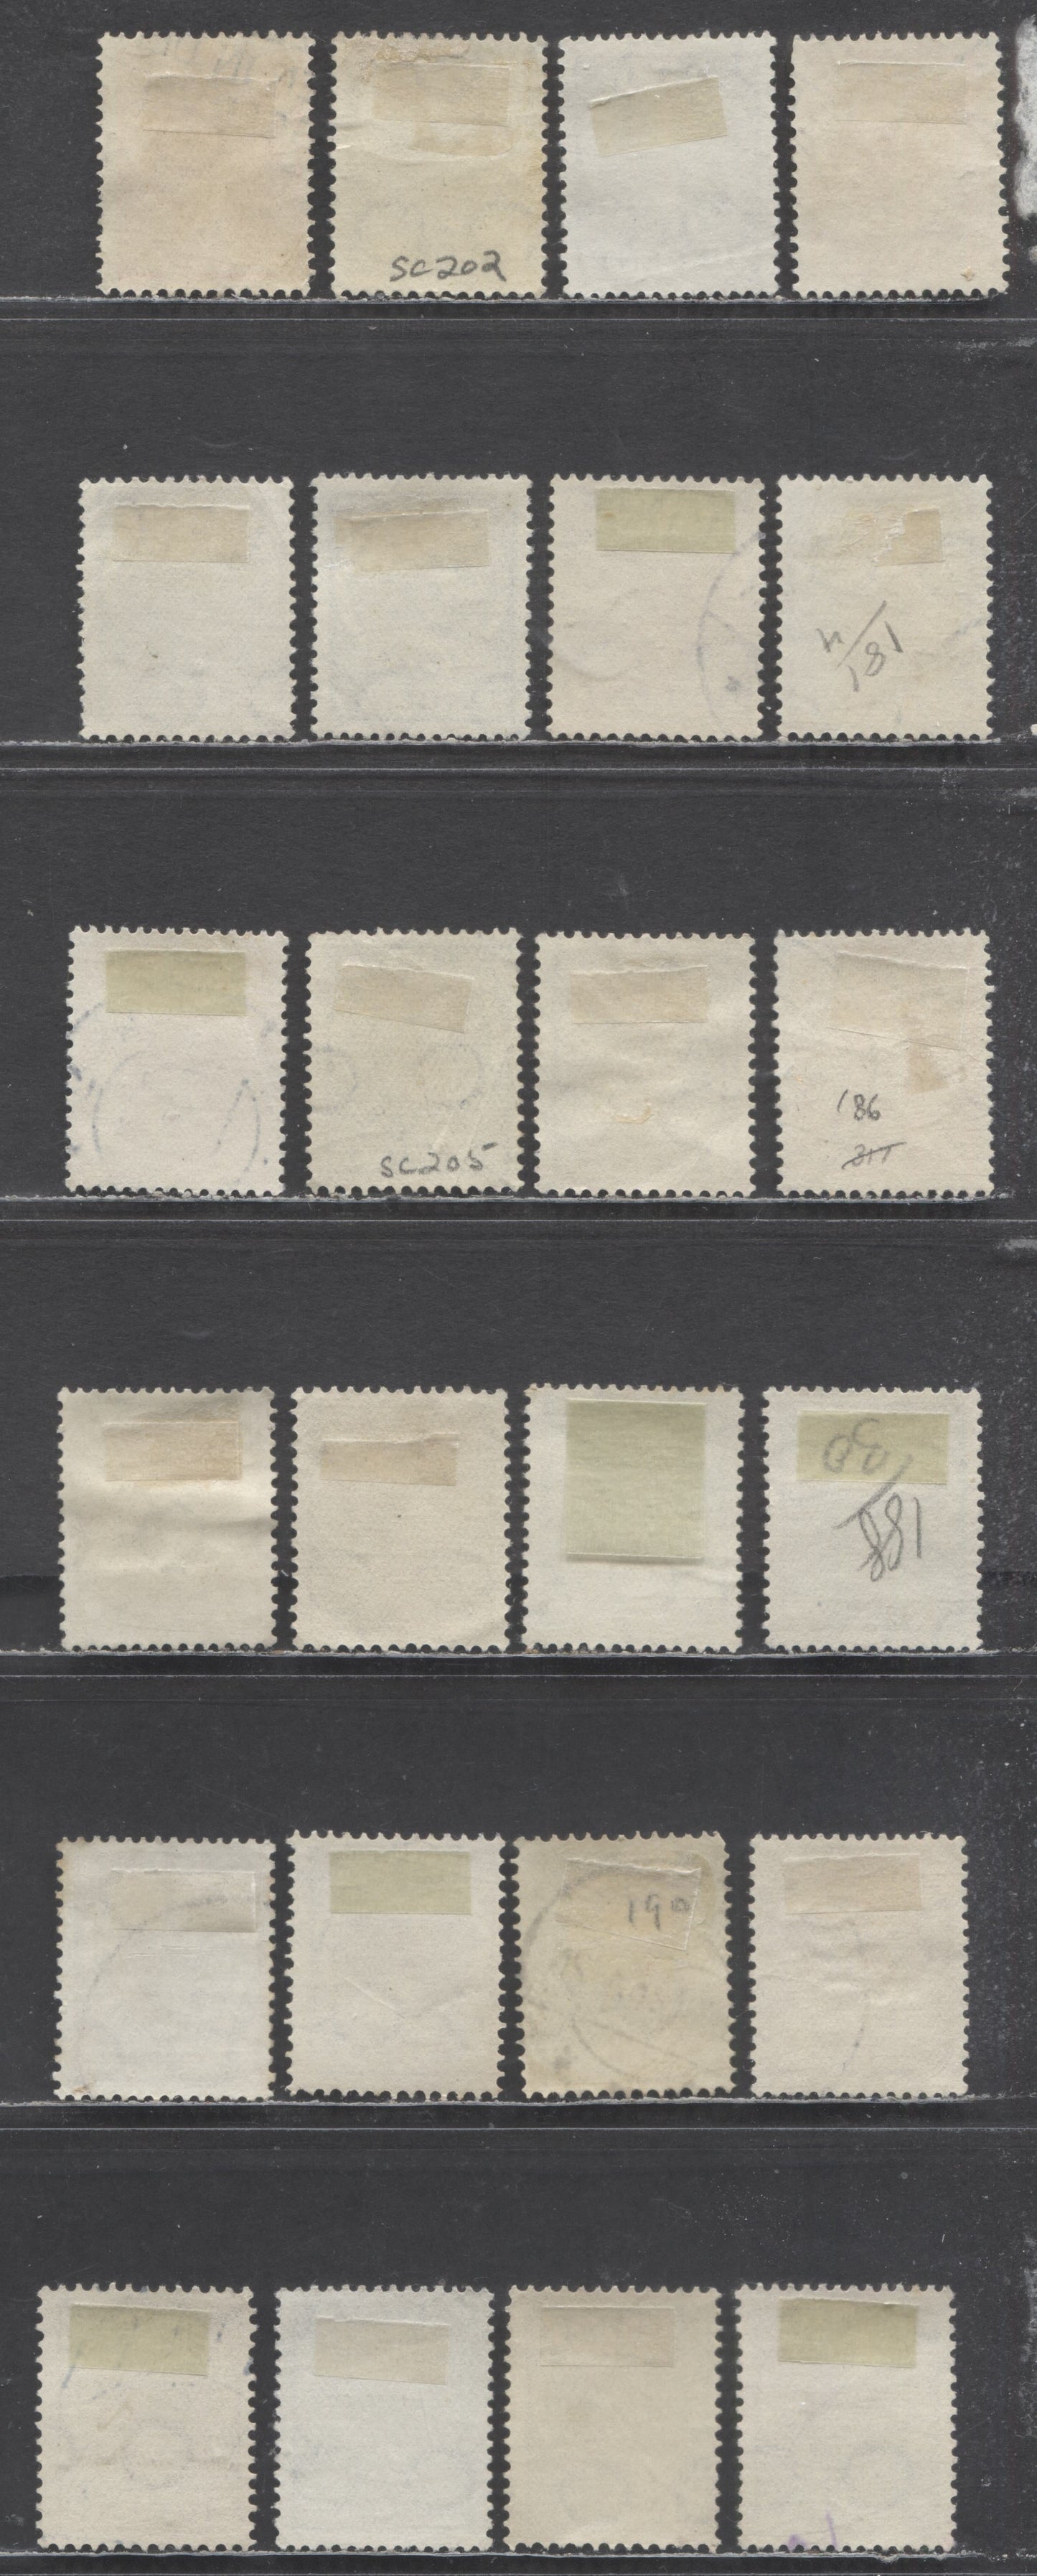 Lot 99 Netherlands SC#177/193 1926 Queen Wilhelmina Definitives, Shade Variations, Circles Wmks, 24 Fine/Very Fine Used Singles, Click on Listing to See ALL Pictures, Estimated Value $30